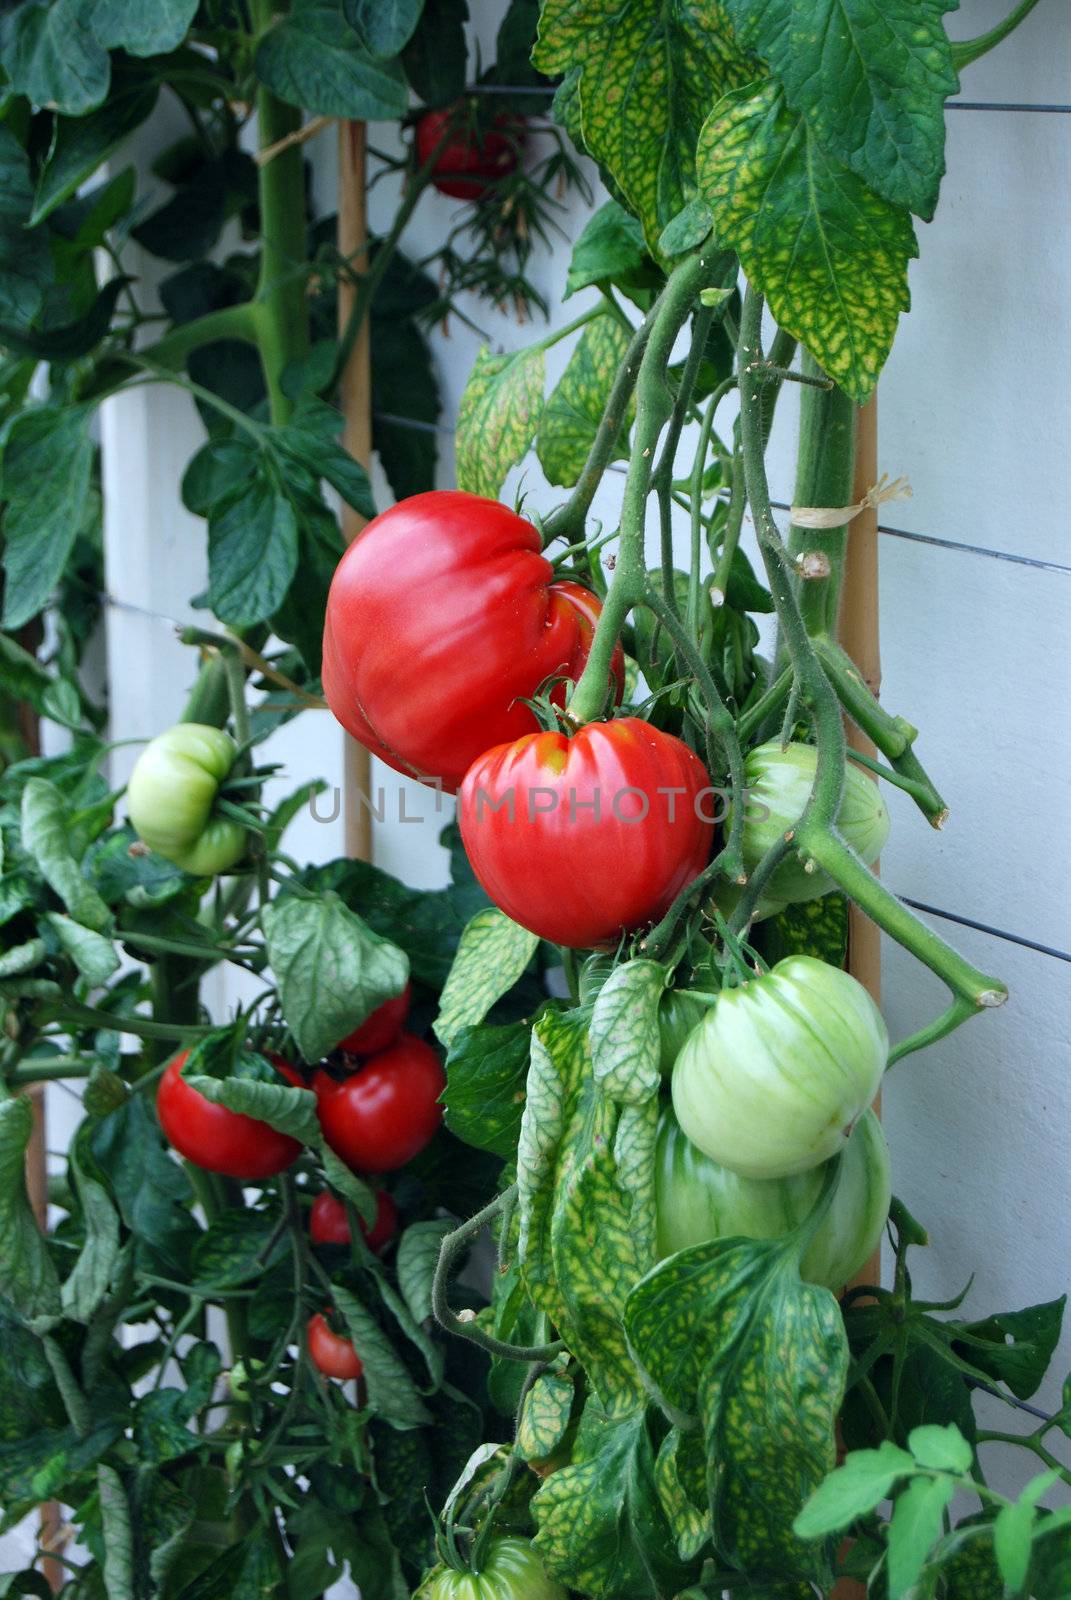 Tomato plant growing under glass with some of the fruit bright red